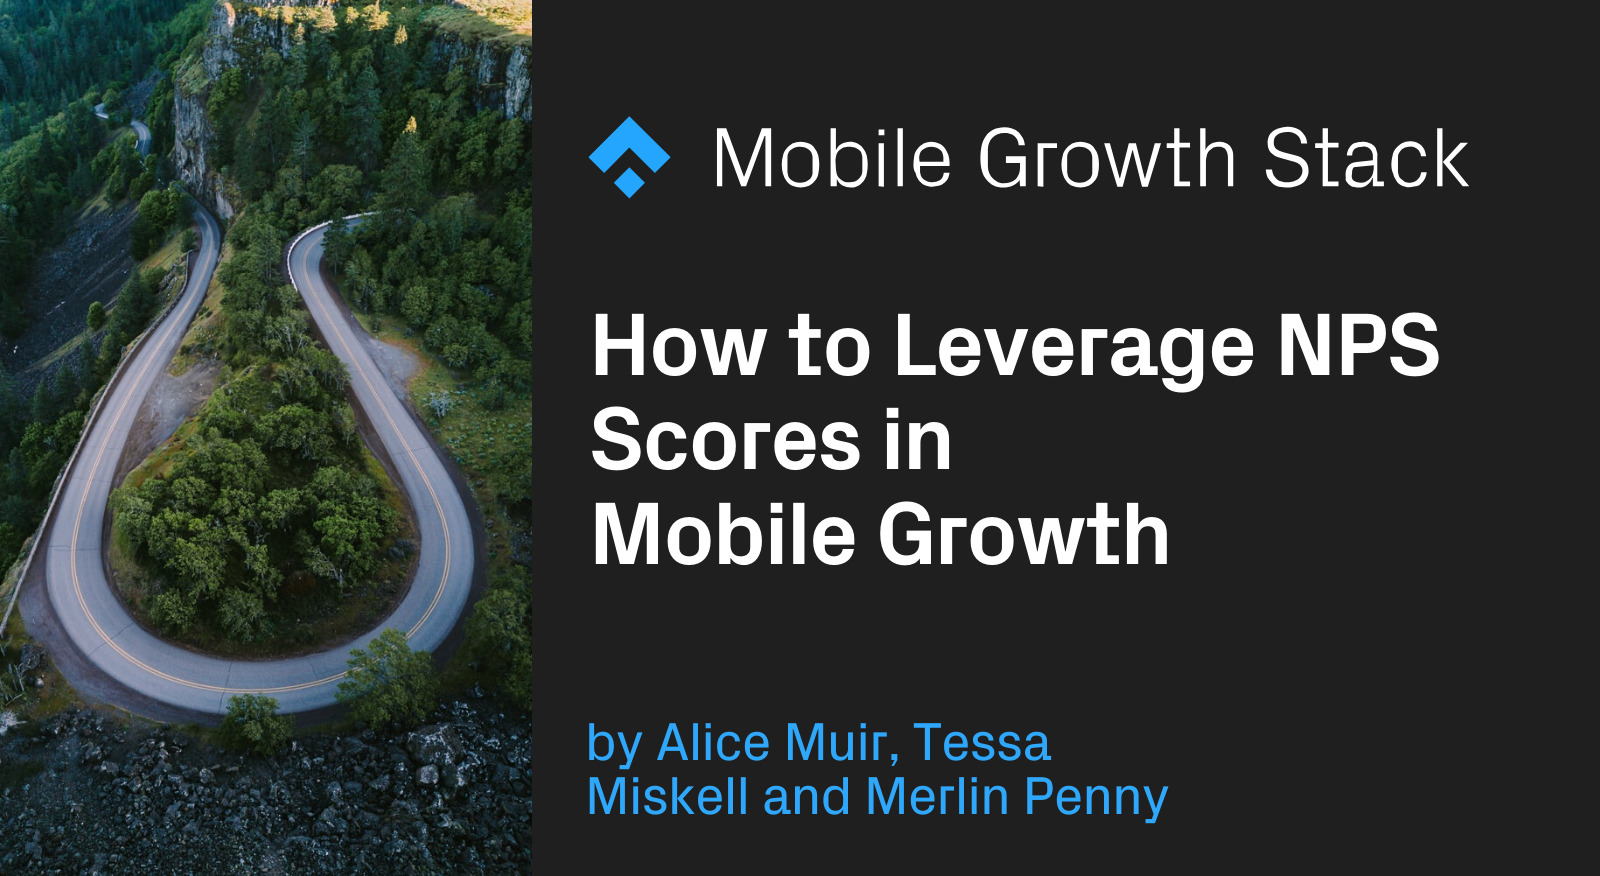 How to leverage NPS scores in mobile growth